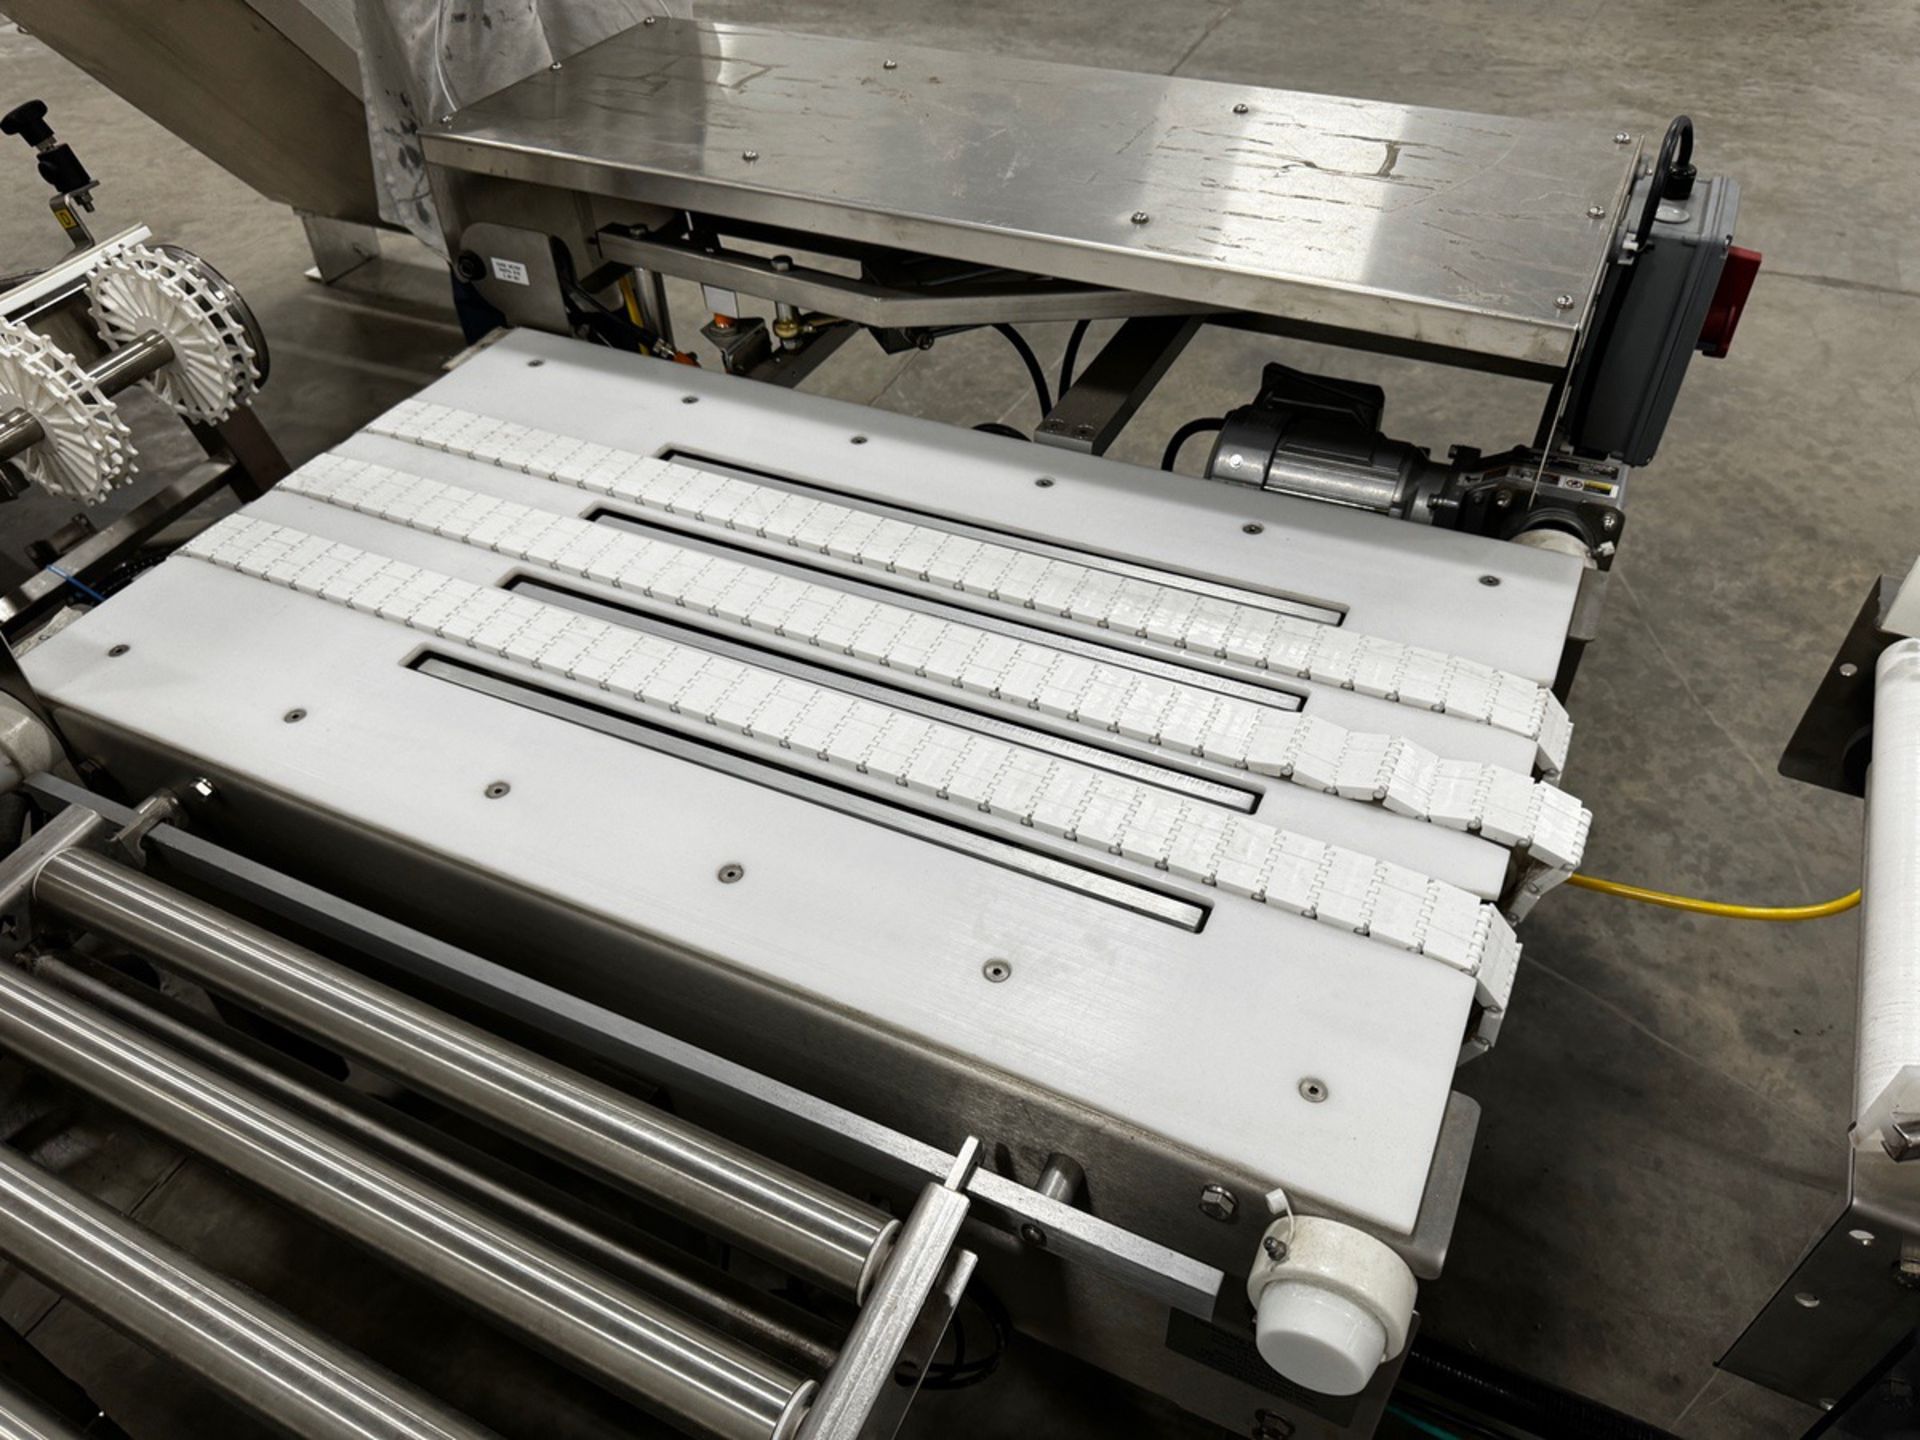 Stainless Steel Frame Timing Conveyor with Allen Bradley PVP 600 Control | Rig Fee $200 - Image 2 of 3